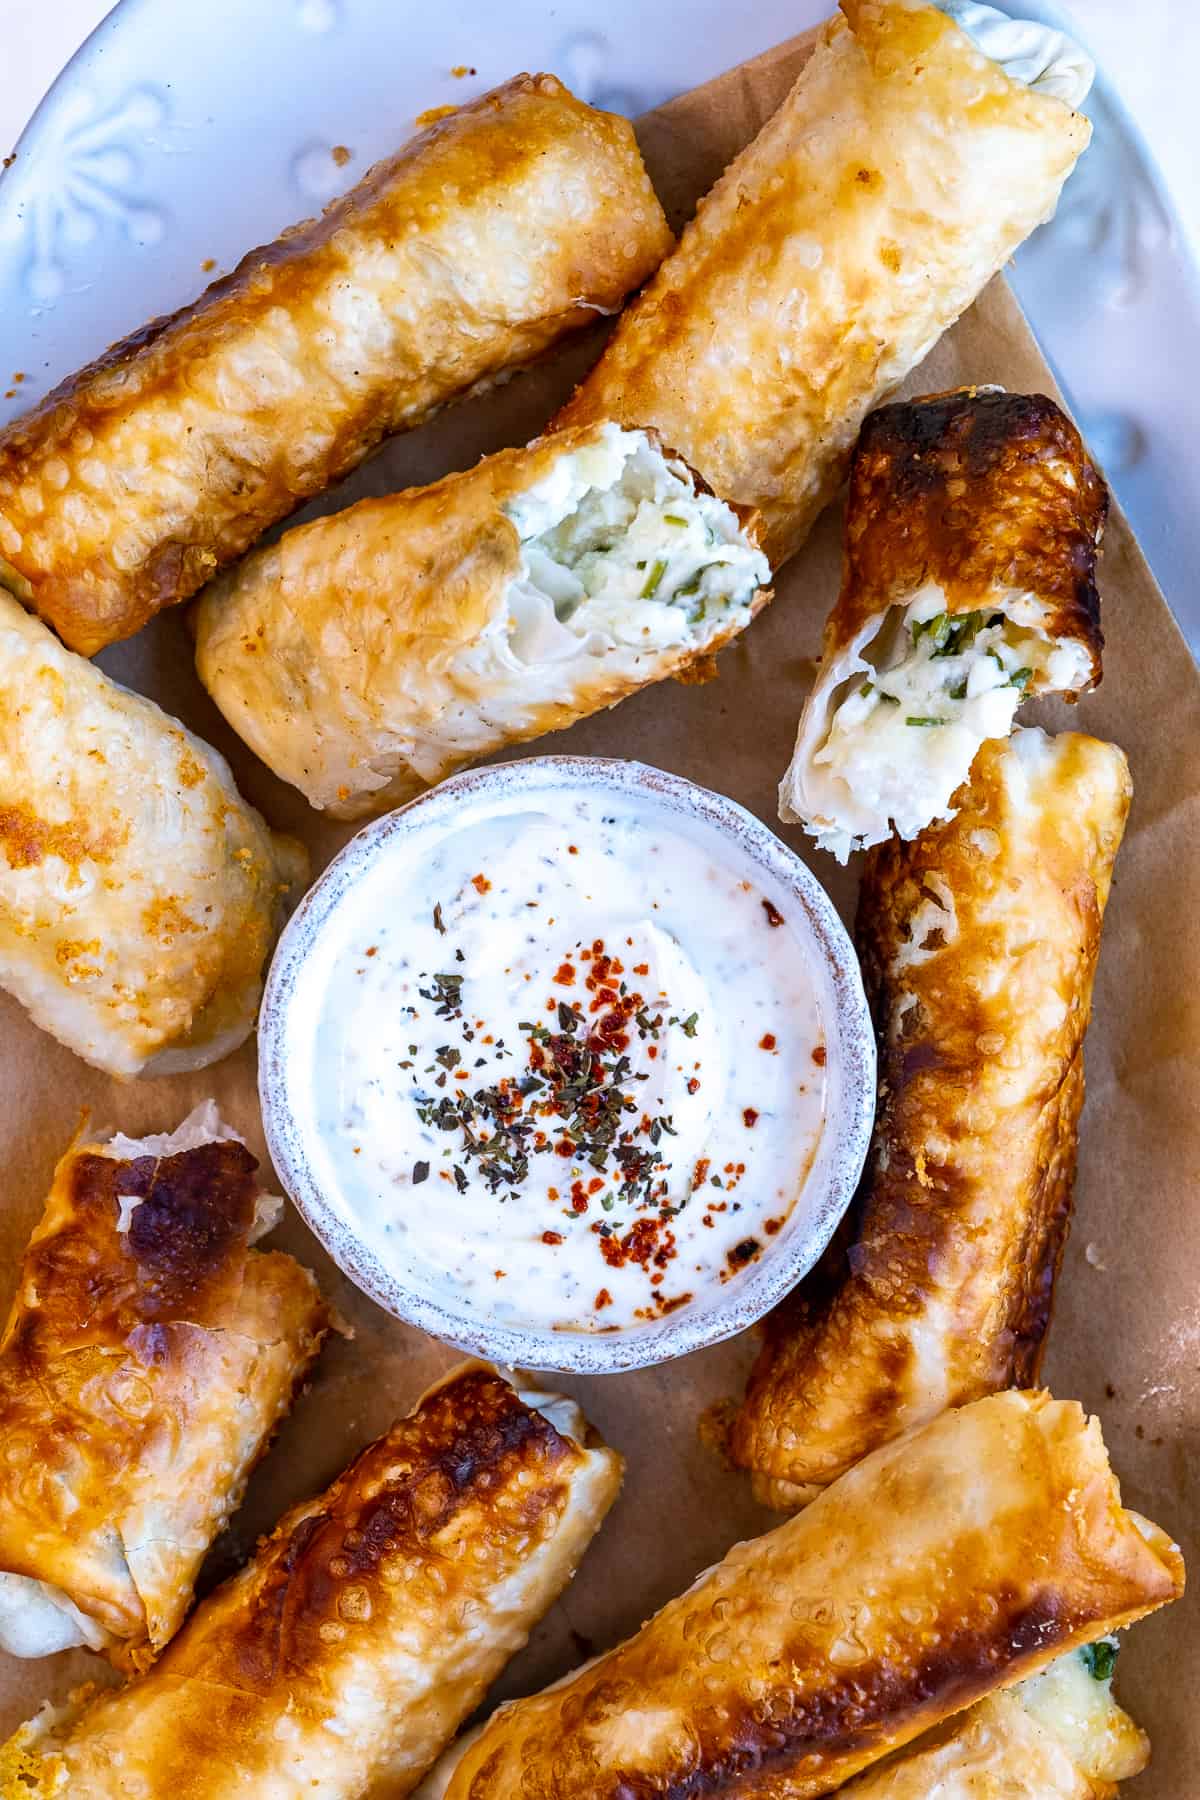 Cheese rolls served with a small bowl of yogurt sauce.